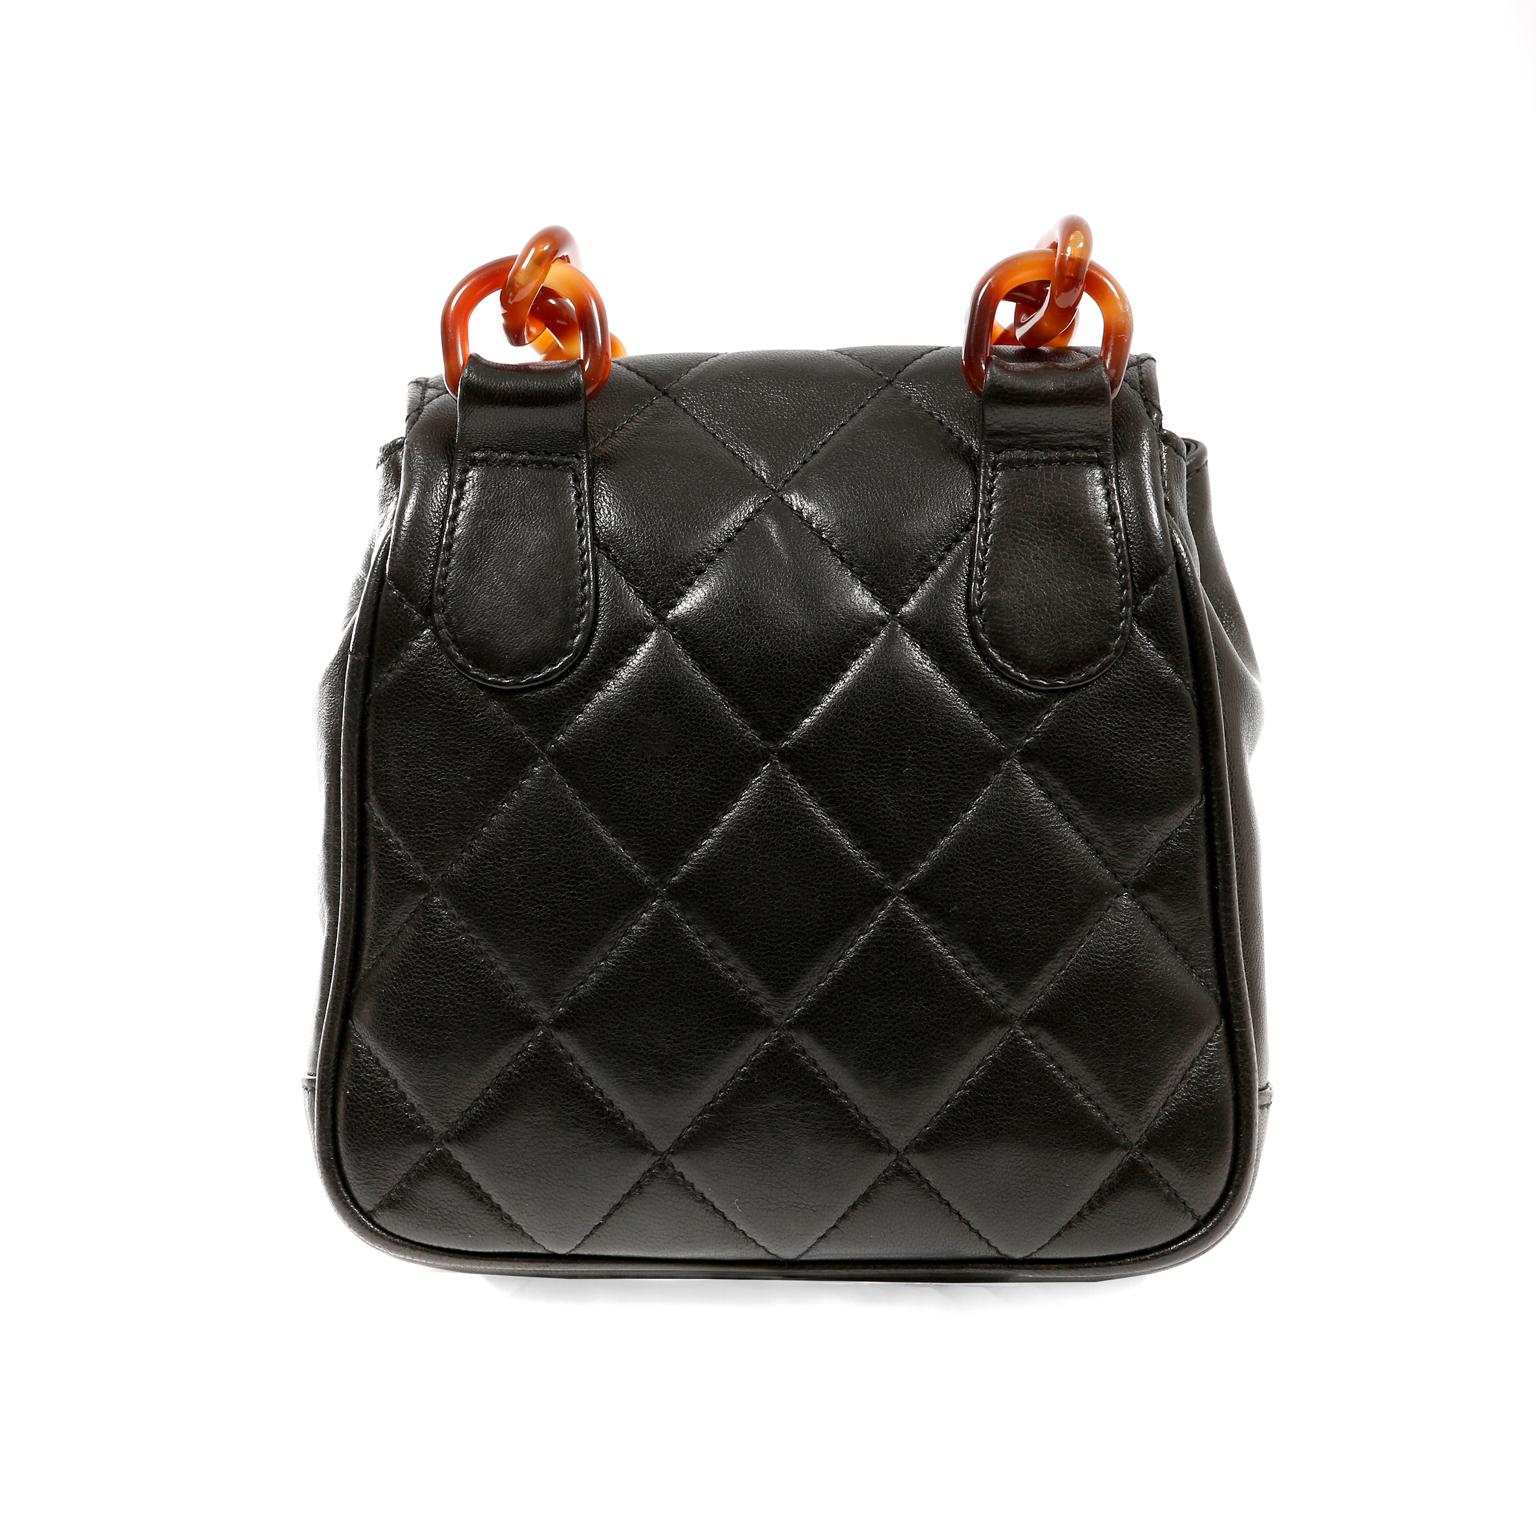 This authentic Chanel Black Leather Tortoise Chain Crossbody Bag is in beautiful vintage condition.  It has enjoyed a previous life and may have some small imperfections. The resin tortoise details makes this a highly collectible piece. 
Black